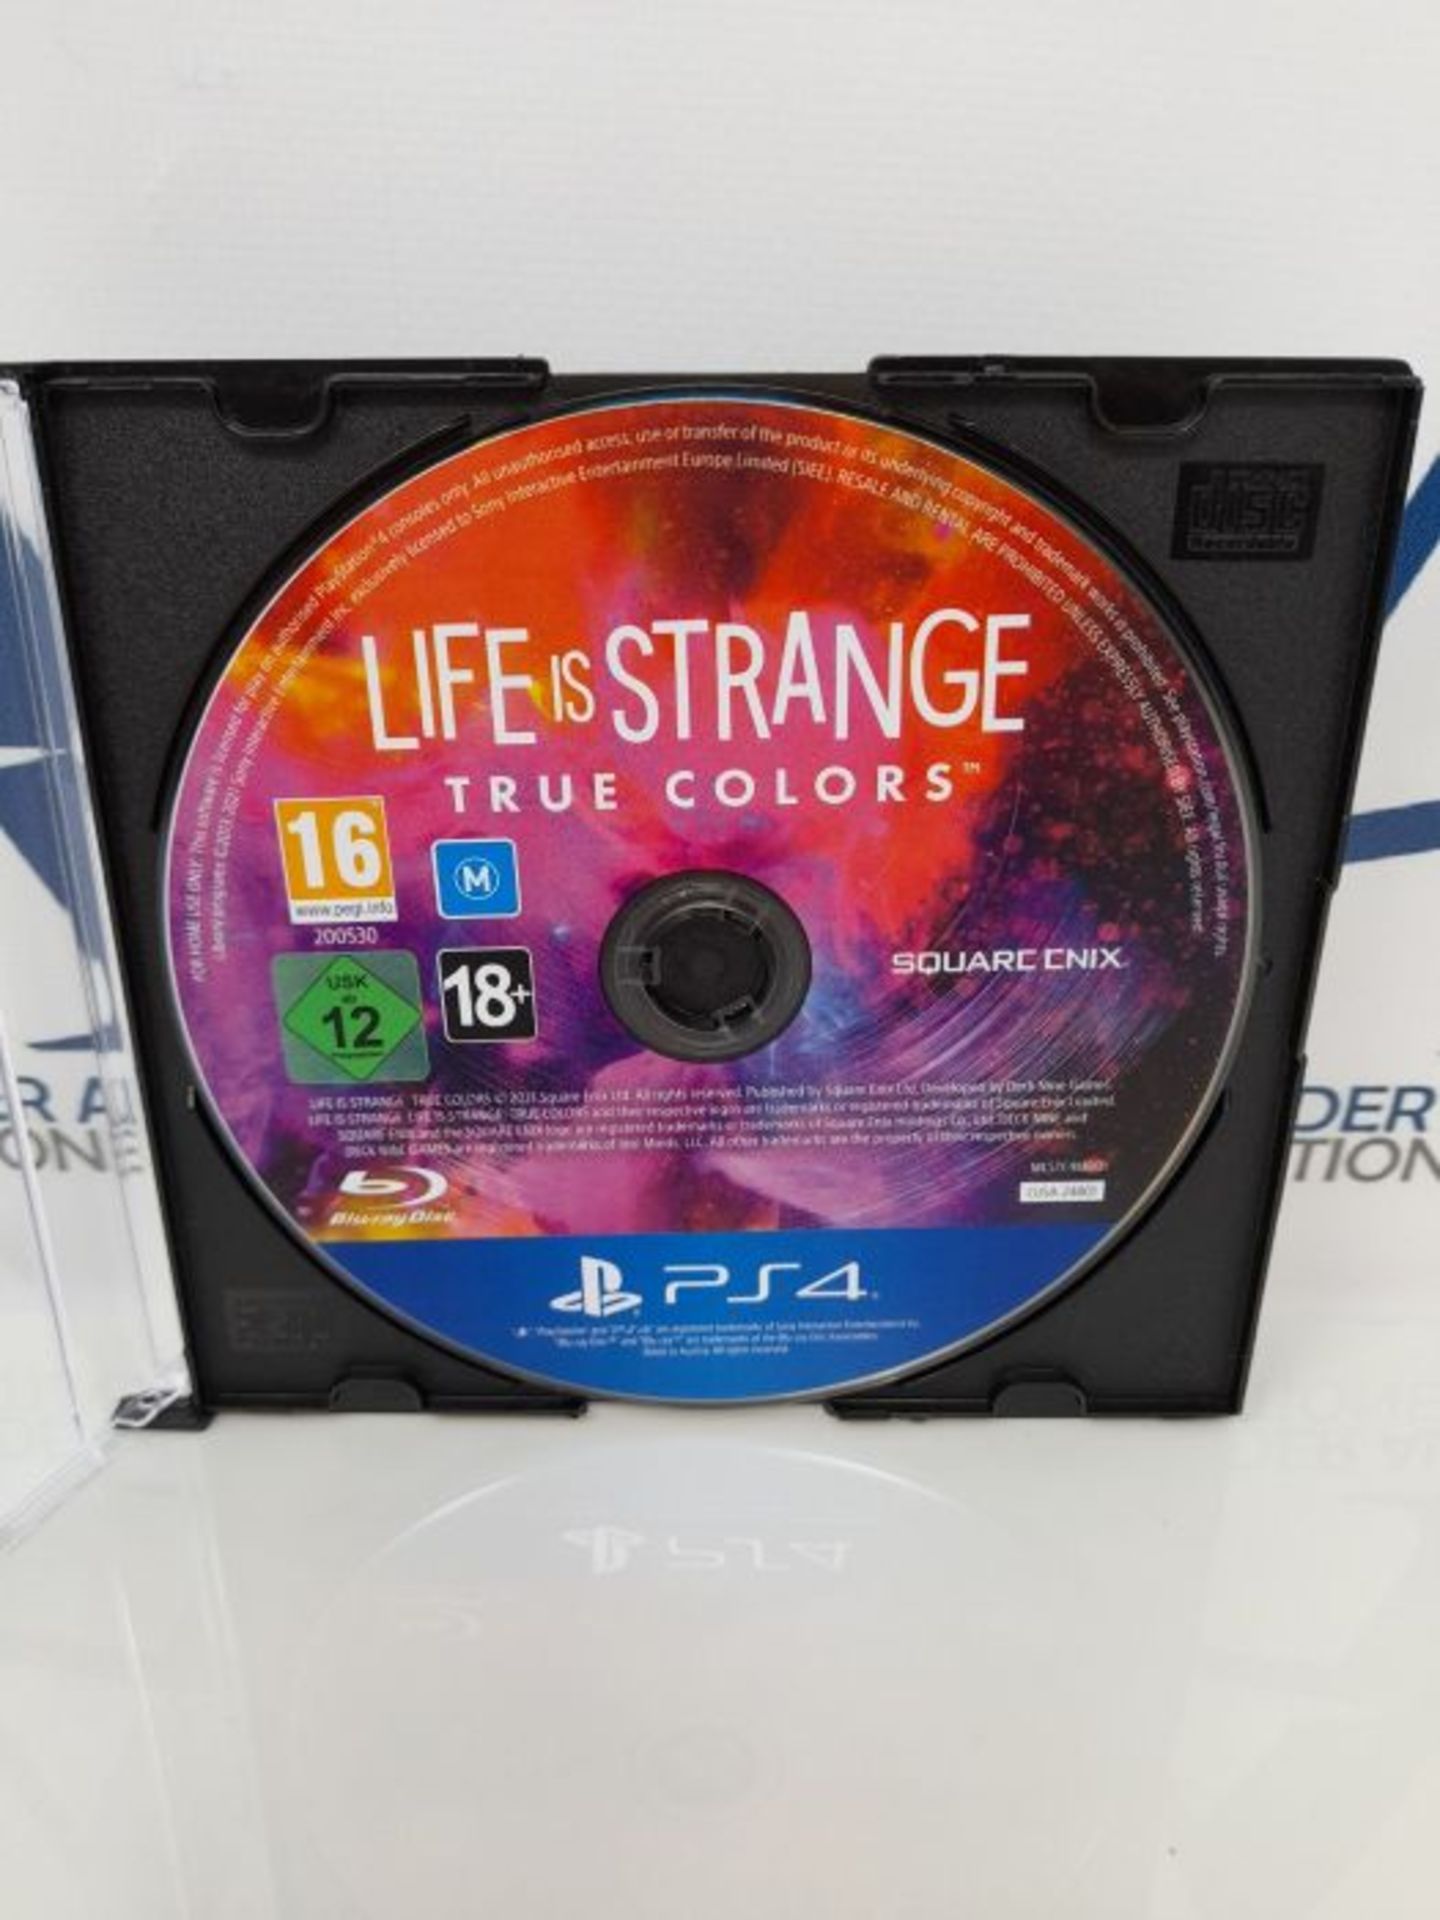 Life is Strange True Colors - PlayStation 4 [Edizione: Spagna] - Image 2 of 2